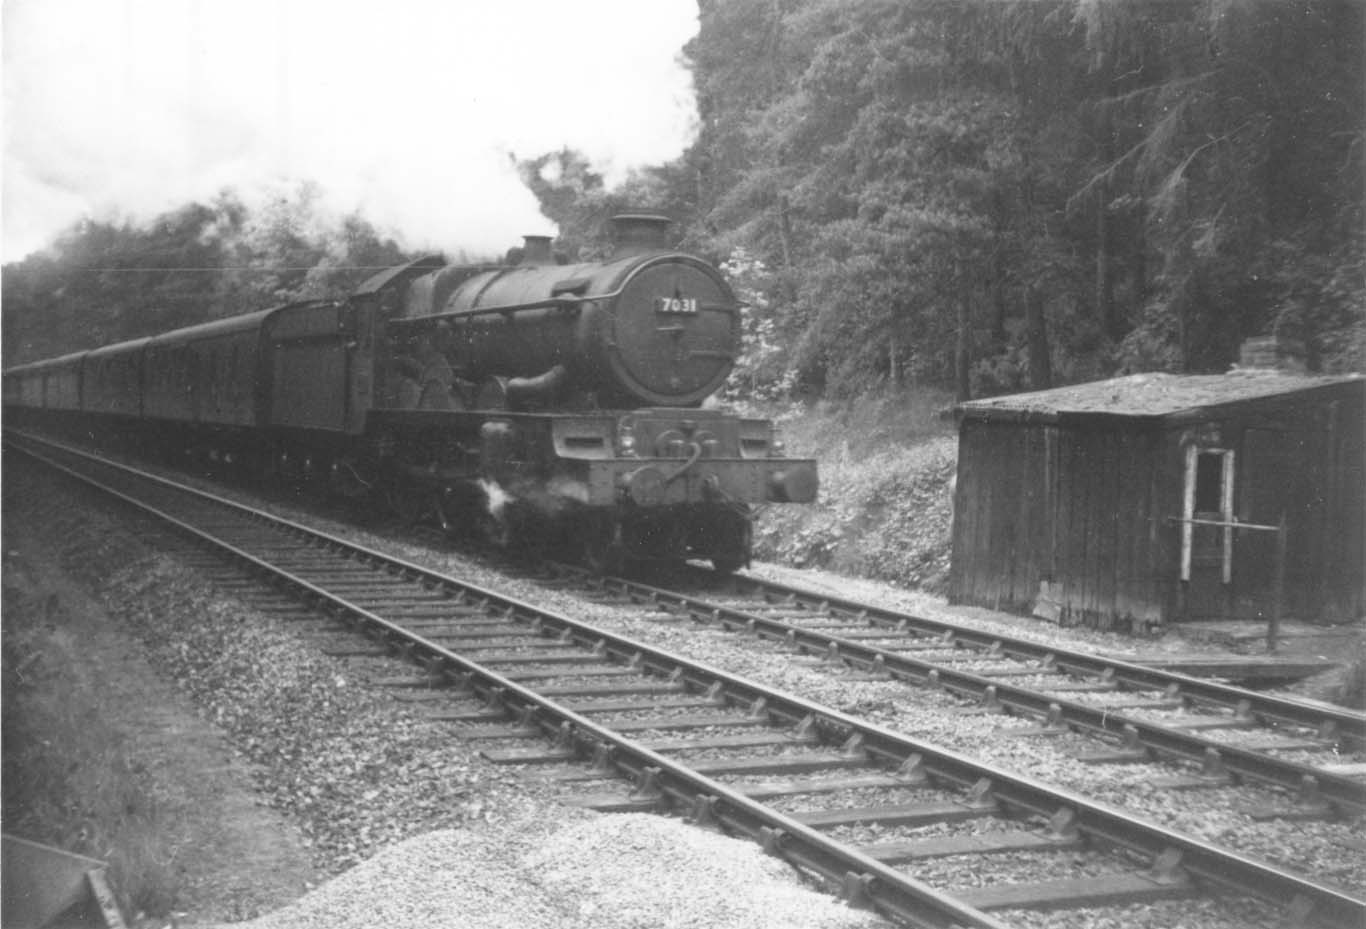 7031 is climbing Chipping Campden Bank with the evening Paddington service on Sunday 26th May 1963 and is just about to enter the tunnel.